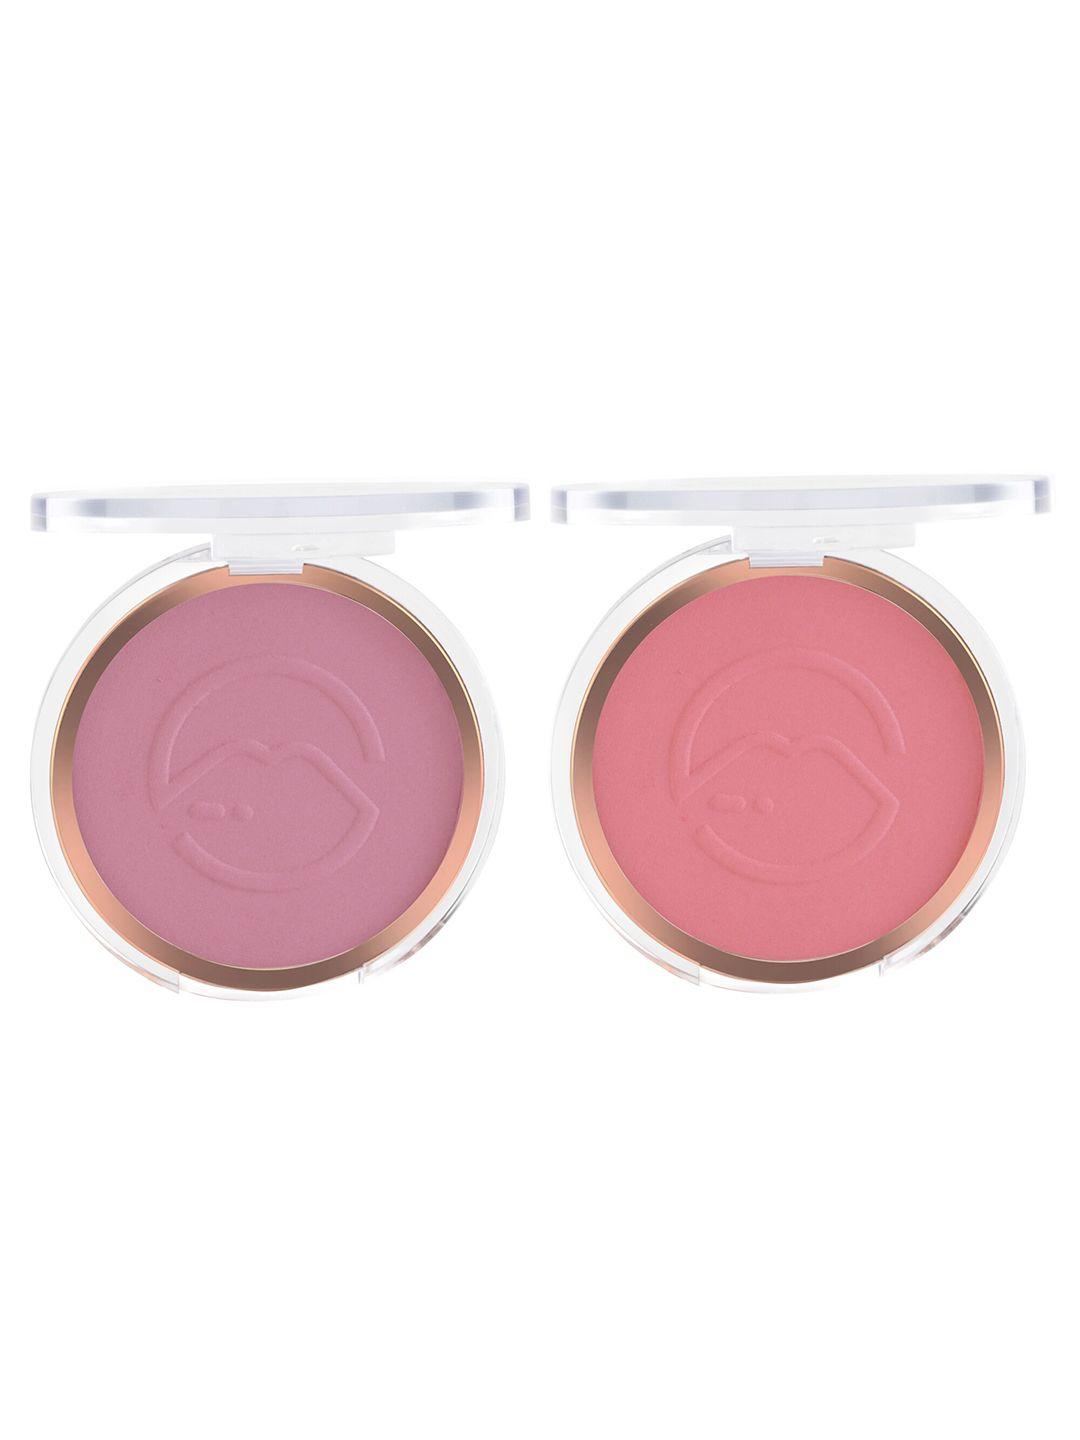 mars set of 2 flush of love highly pigmented matte face blusher - shade 04 & 05